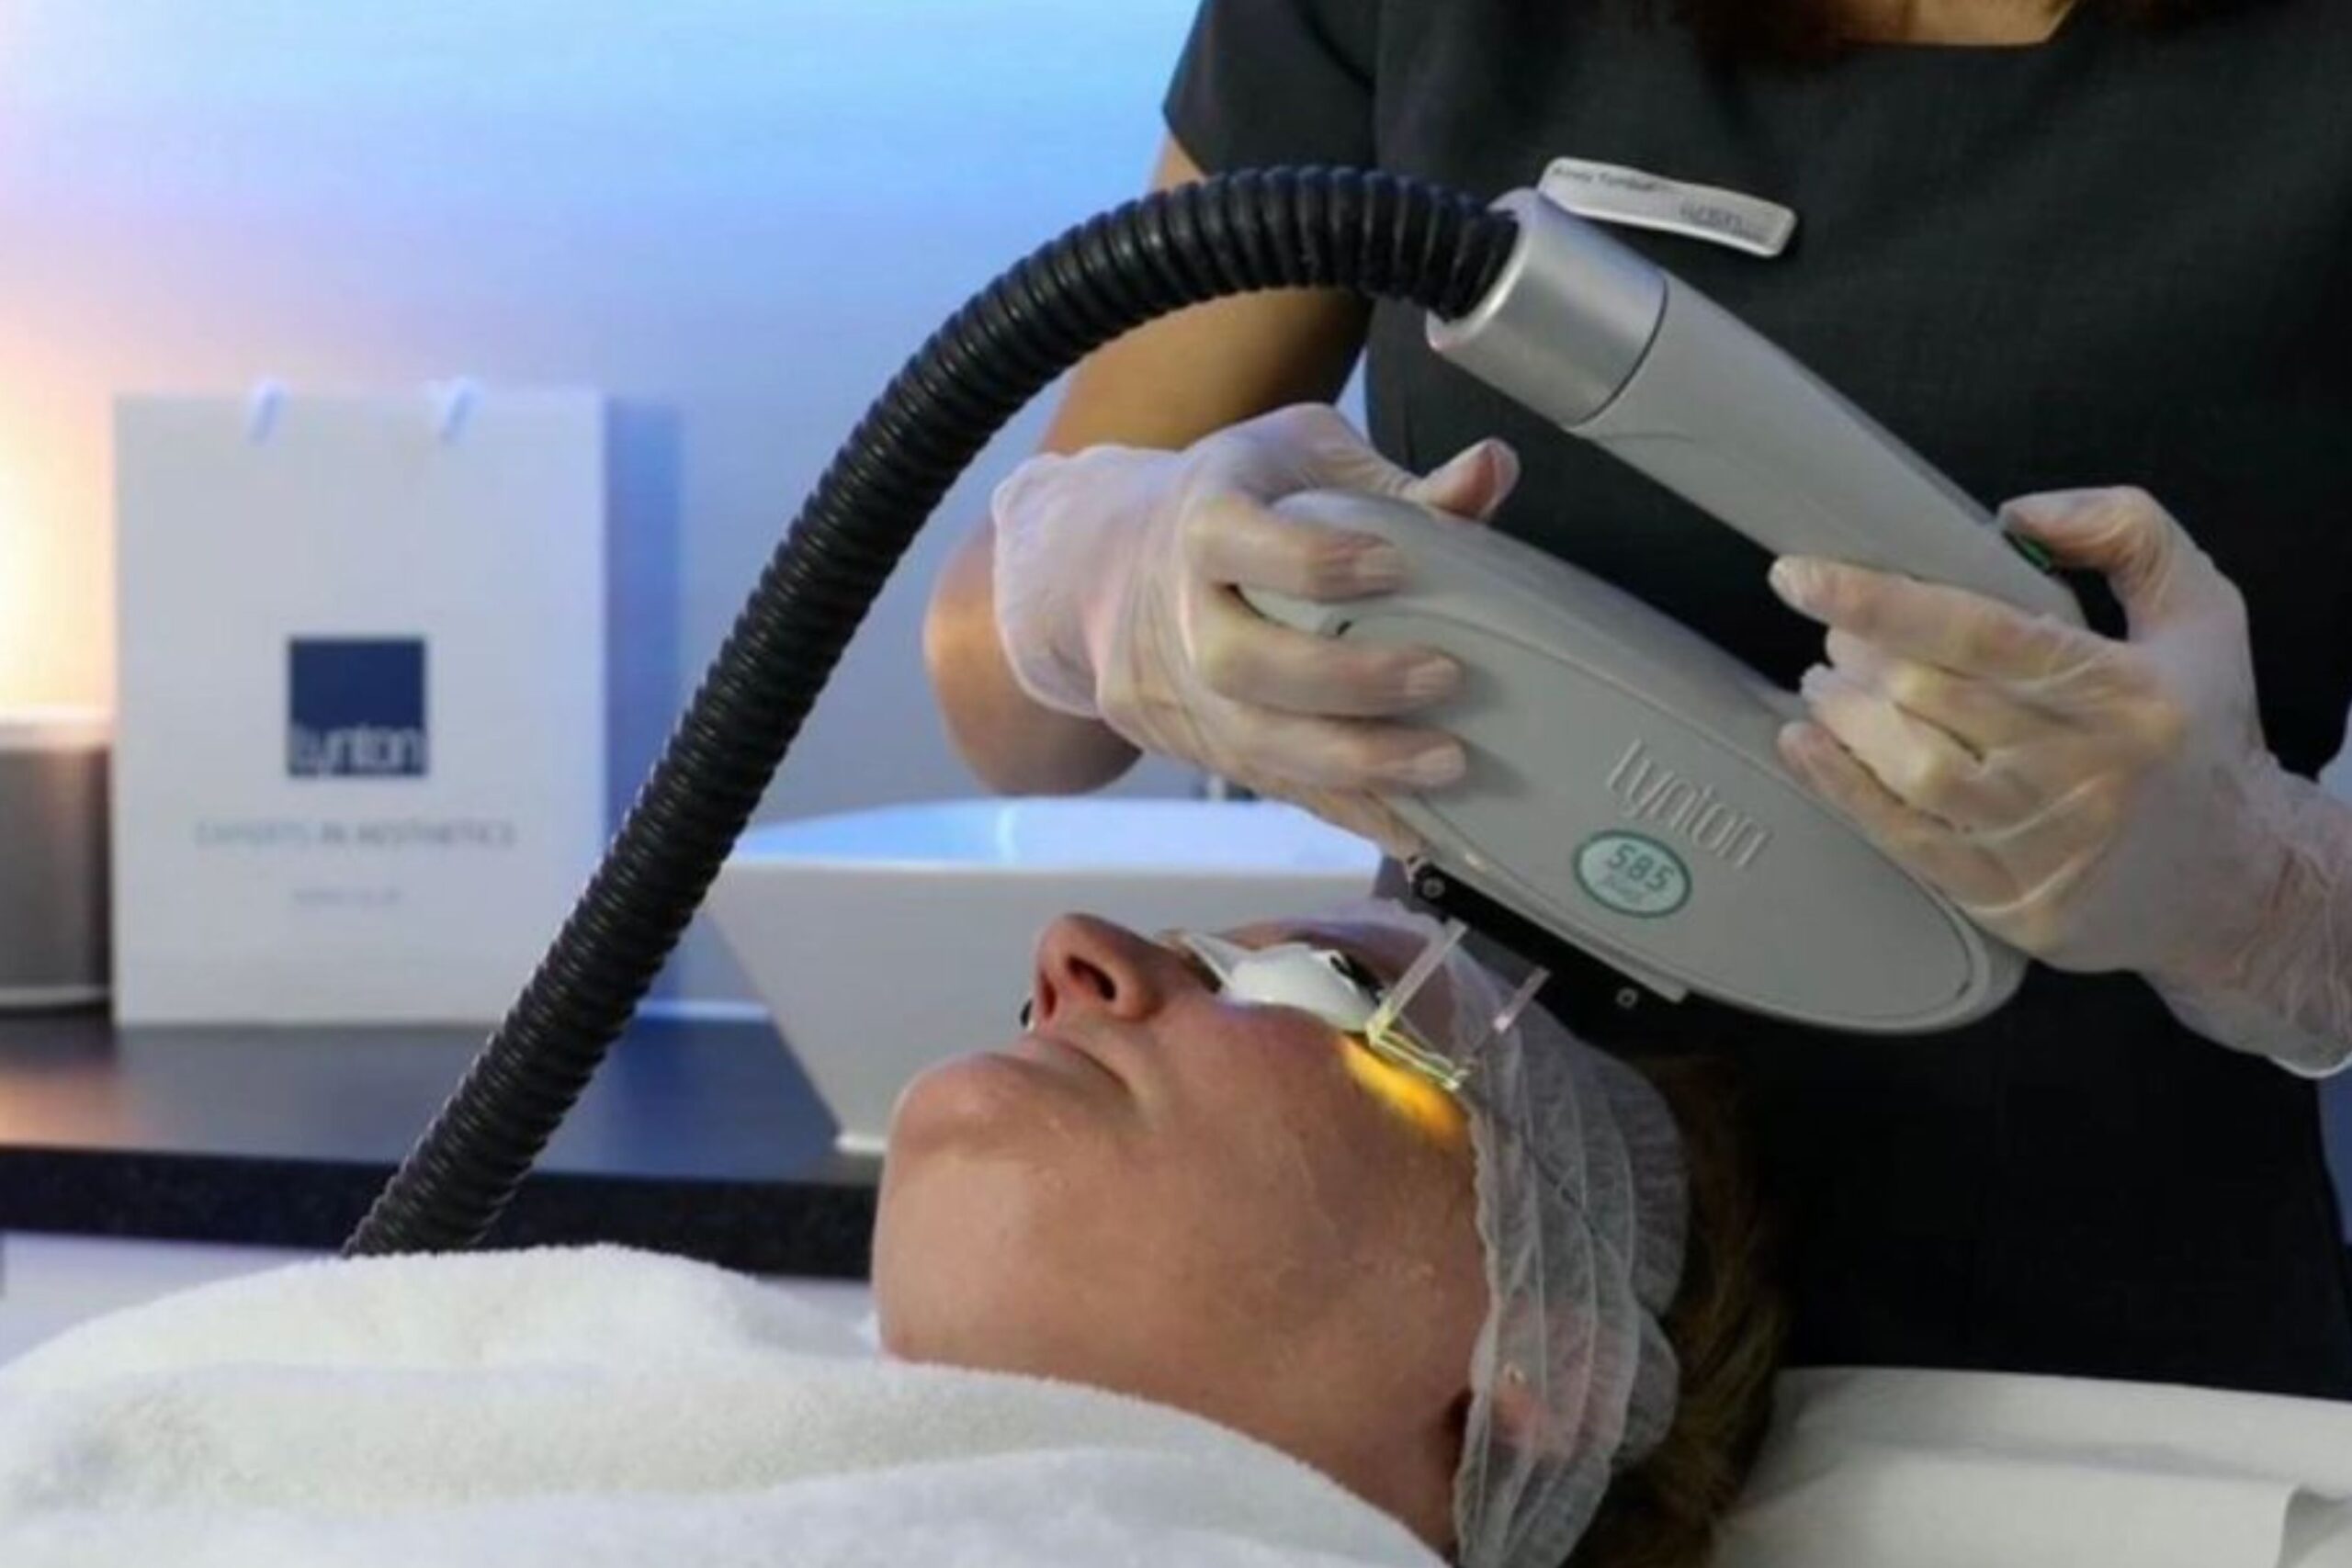 IPL / Laser therapy for for uneven skin tone and pigmentation at Freyja Medical in Wrexham, Nantwich and Cheshire